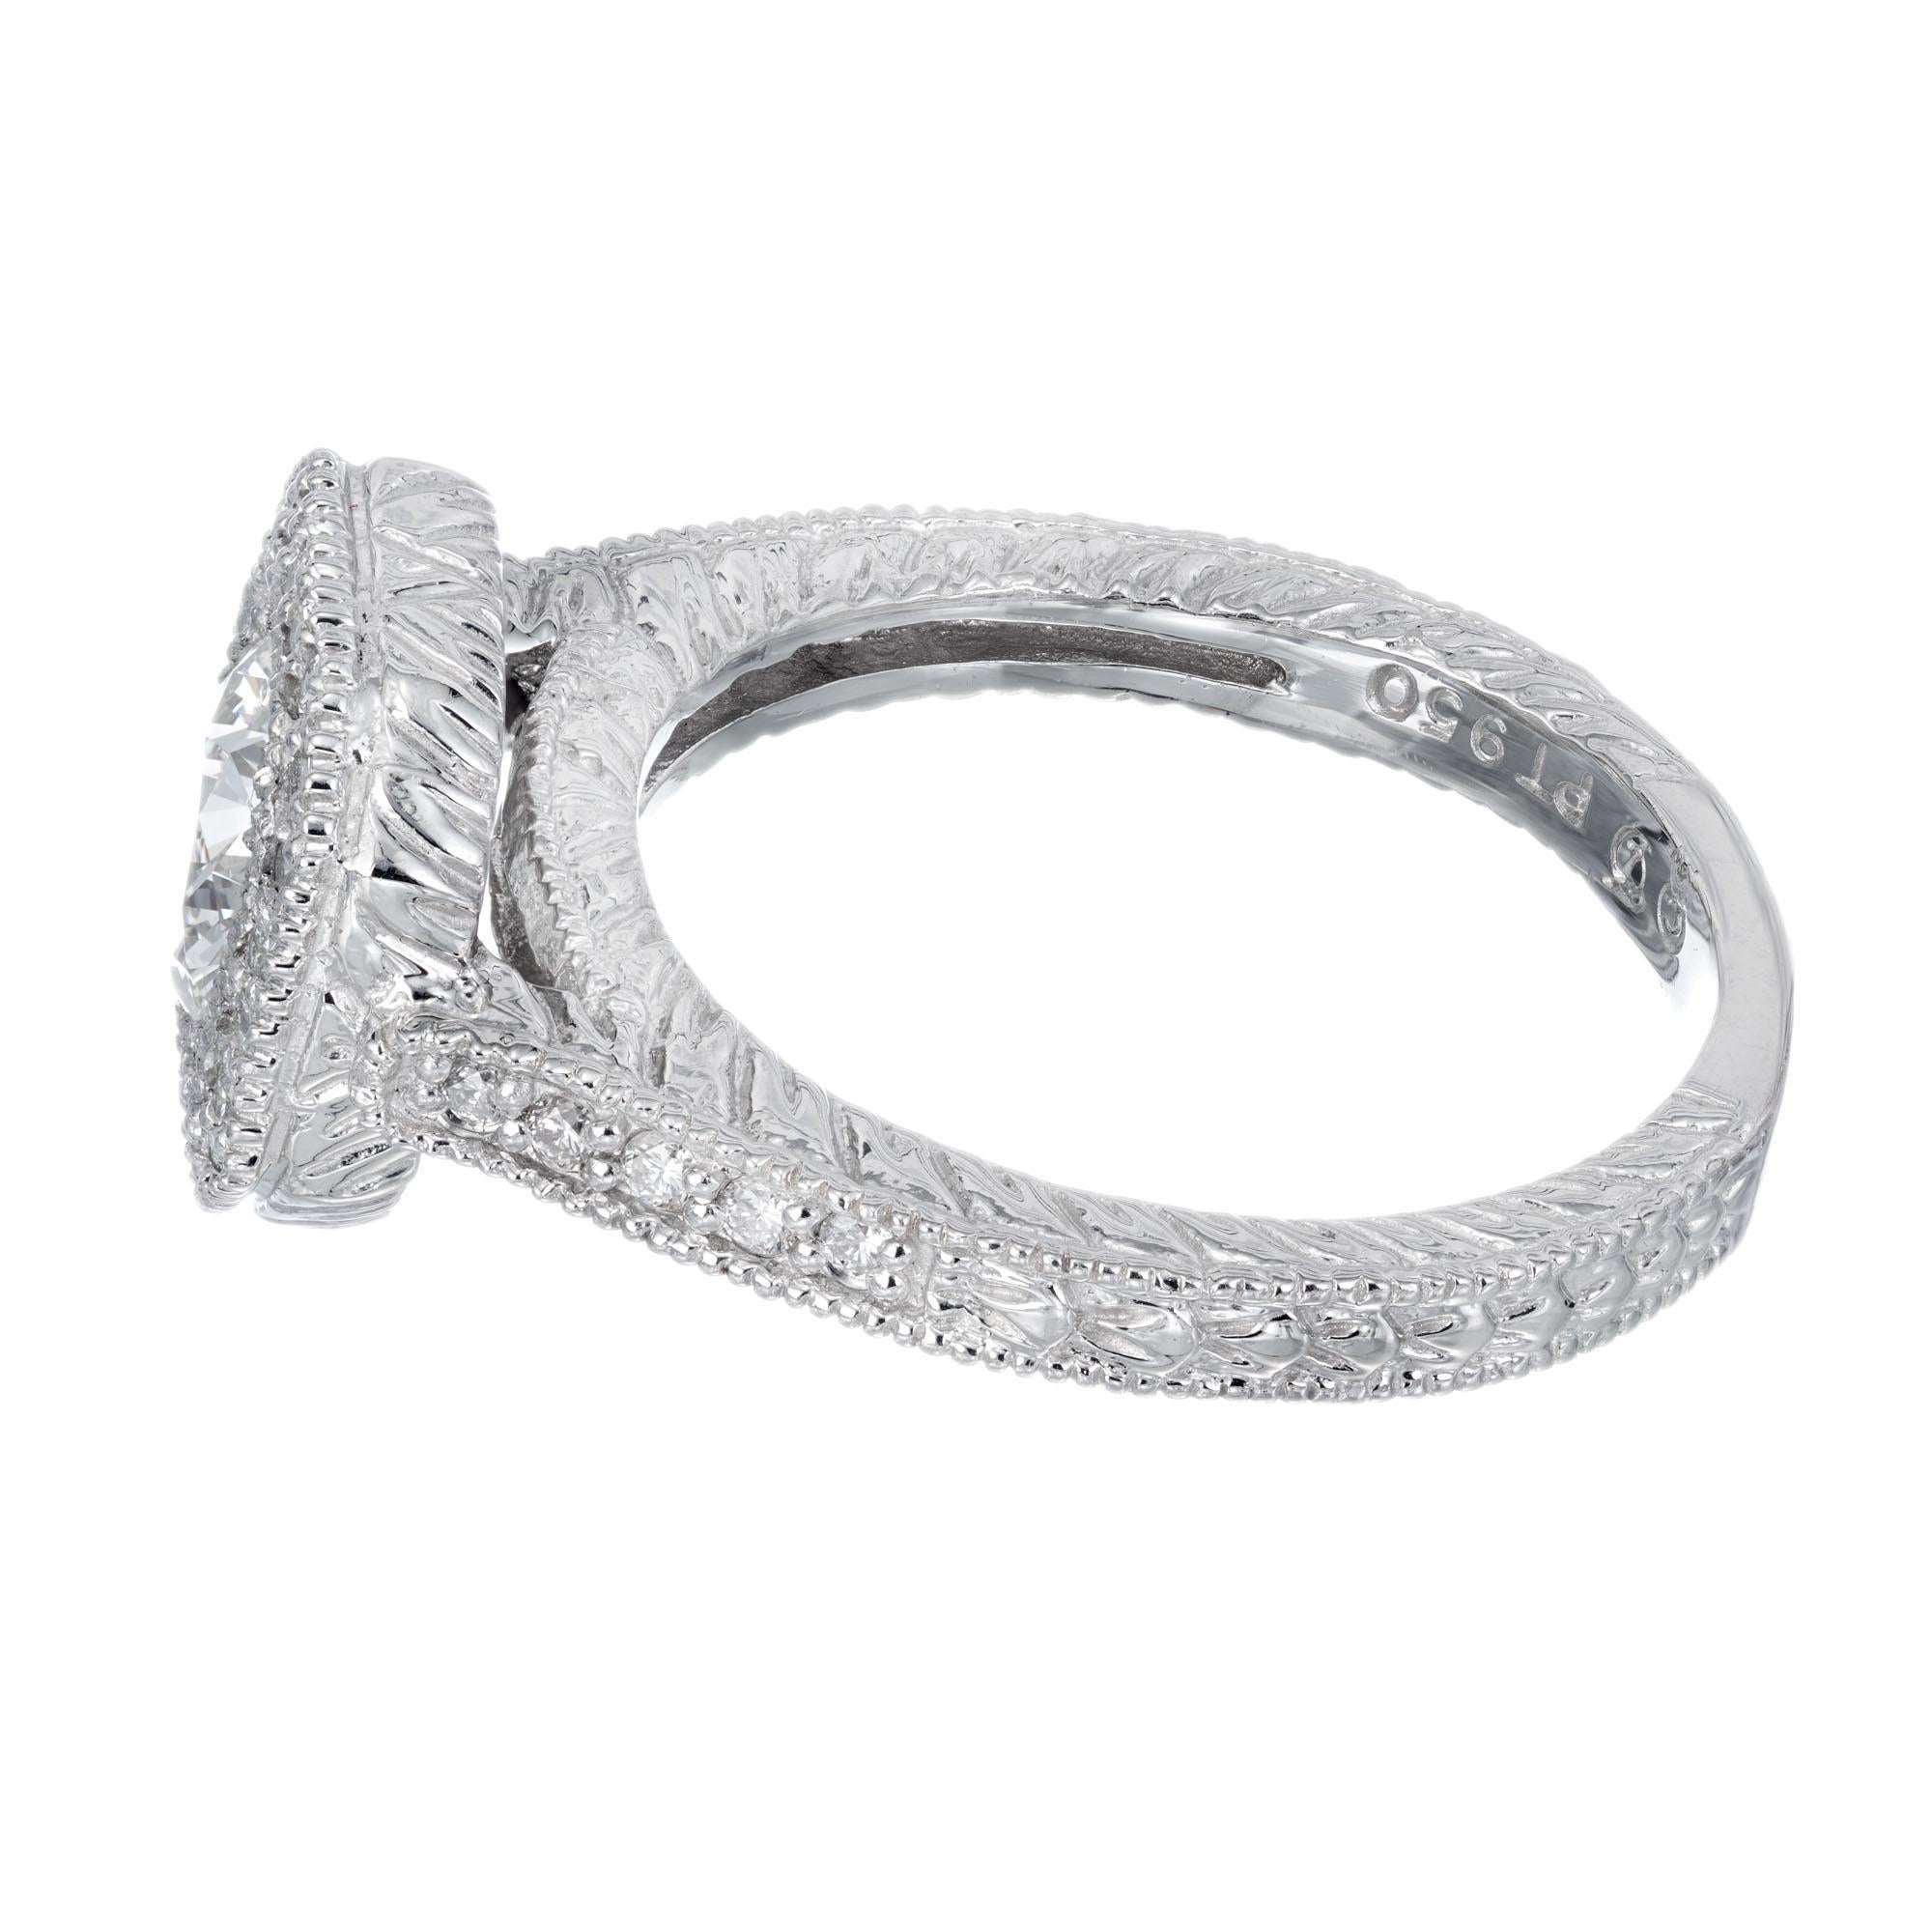 EGL Certified 1.05 Carat Diamond Platinum Engagement Ring In Excellent Condition For Sale In Stamford, CT